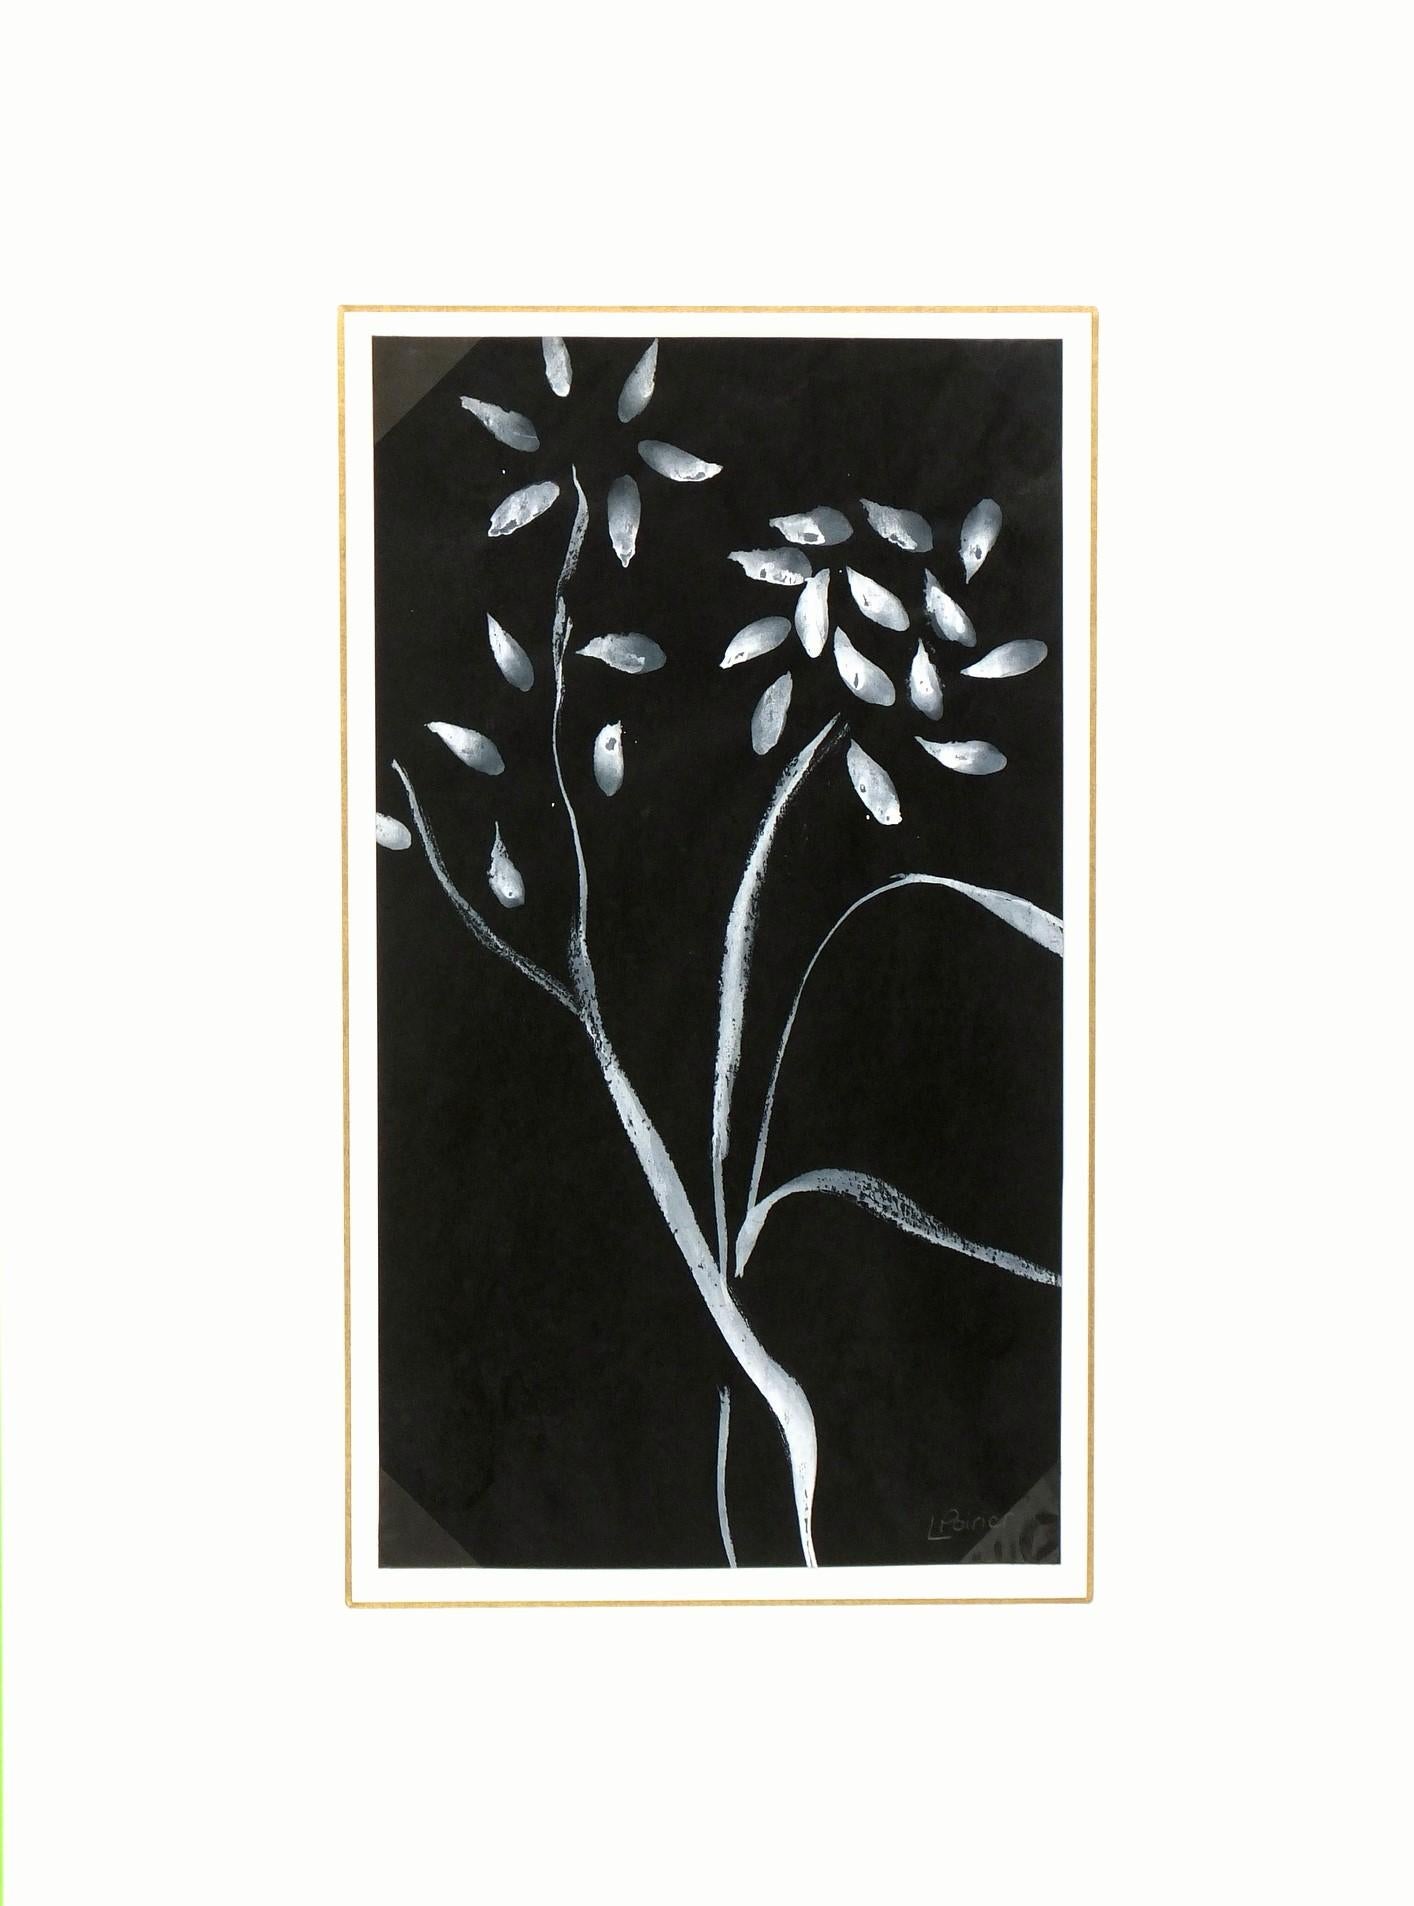 French painting of minimalistic white flowers against a rich black background by artist Louisette Poirier, circa 1960. Poirier's sheer gentle brushstrokes lend a soothing quality to the image. Signed lower right.

Original artwork on paper displayed